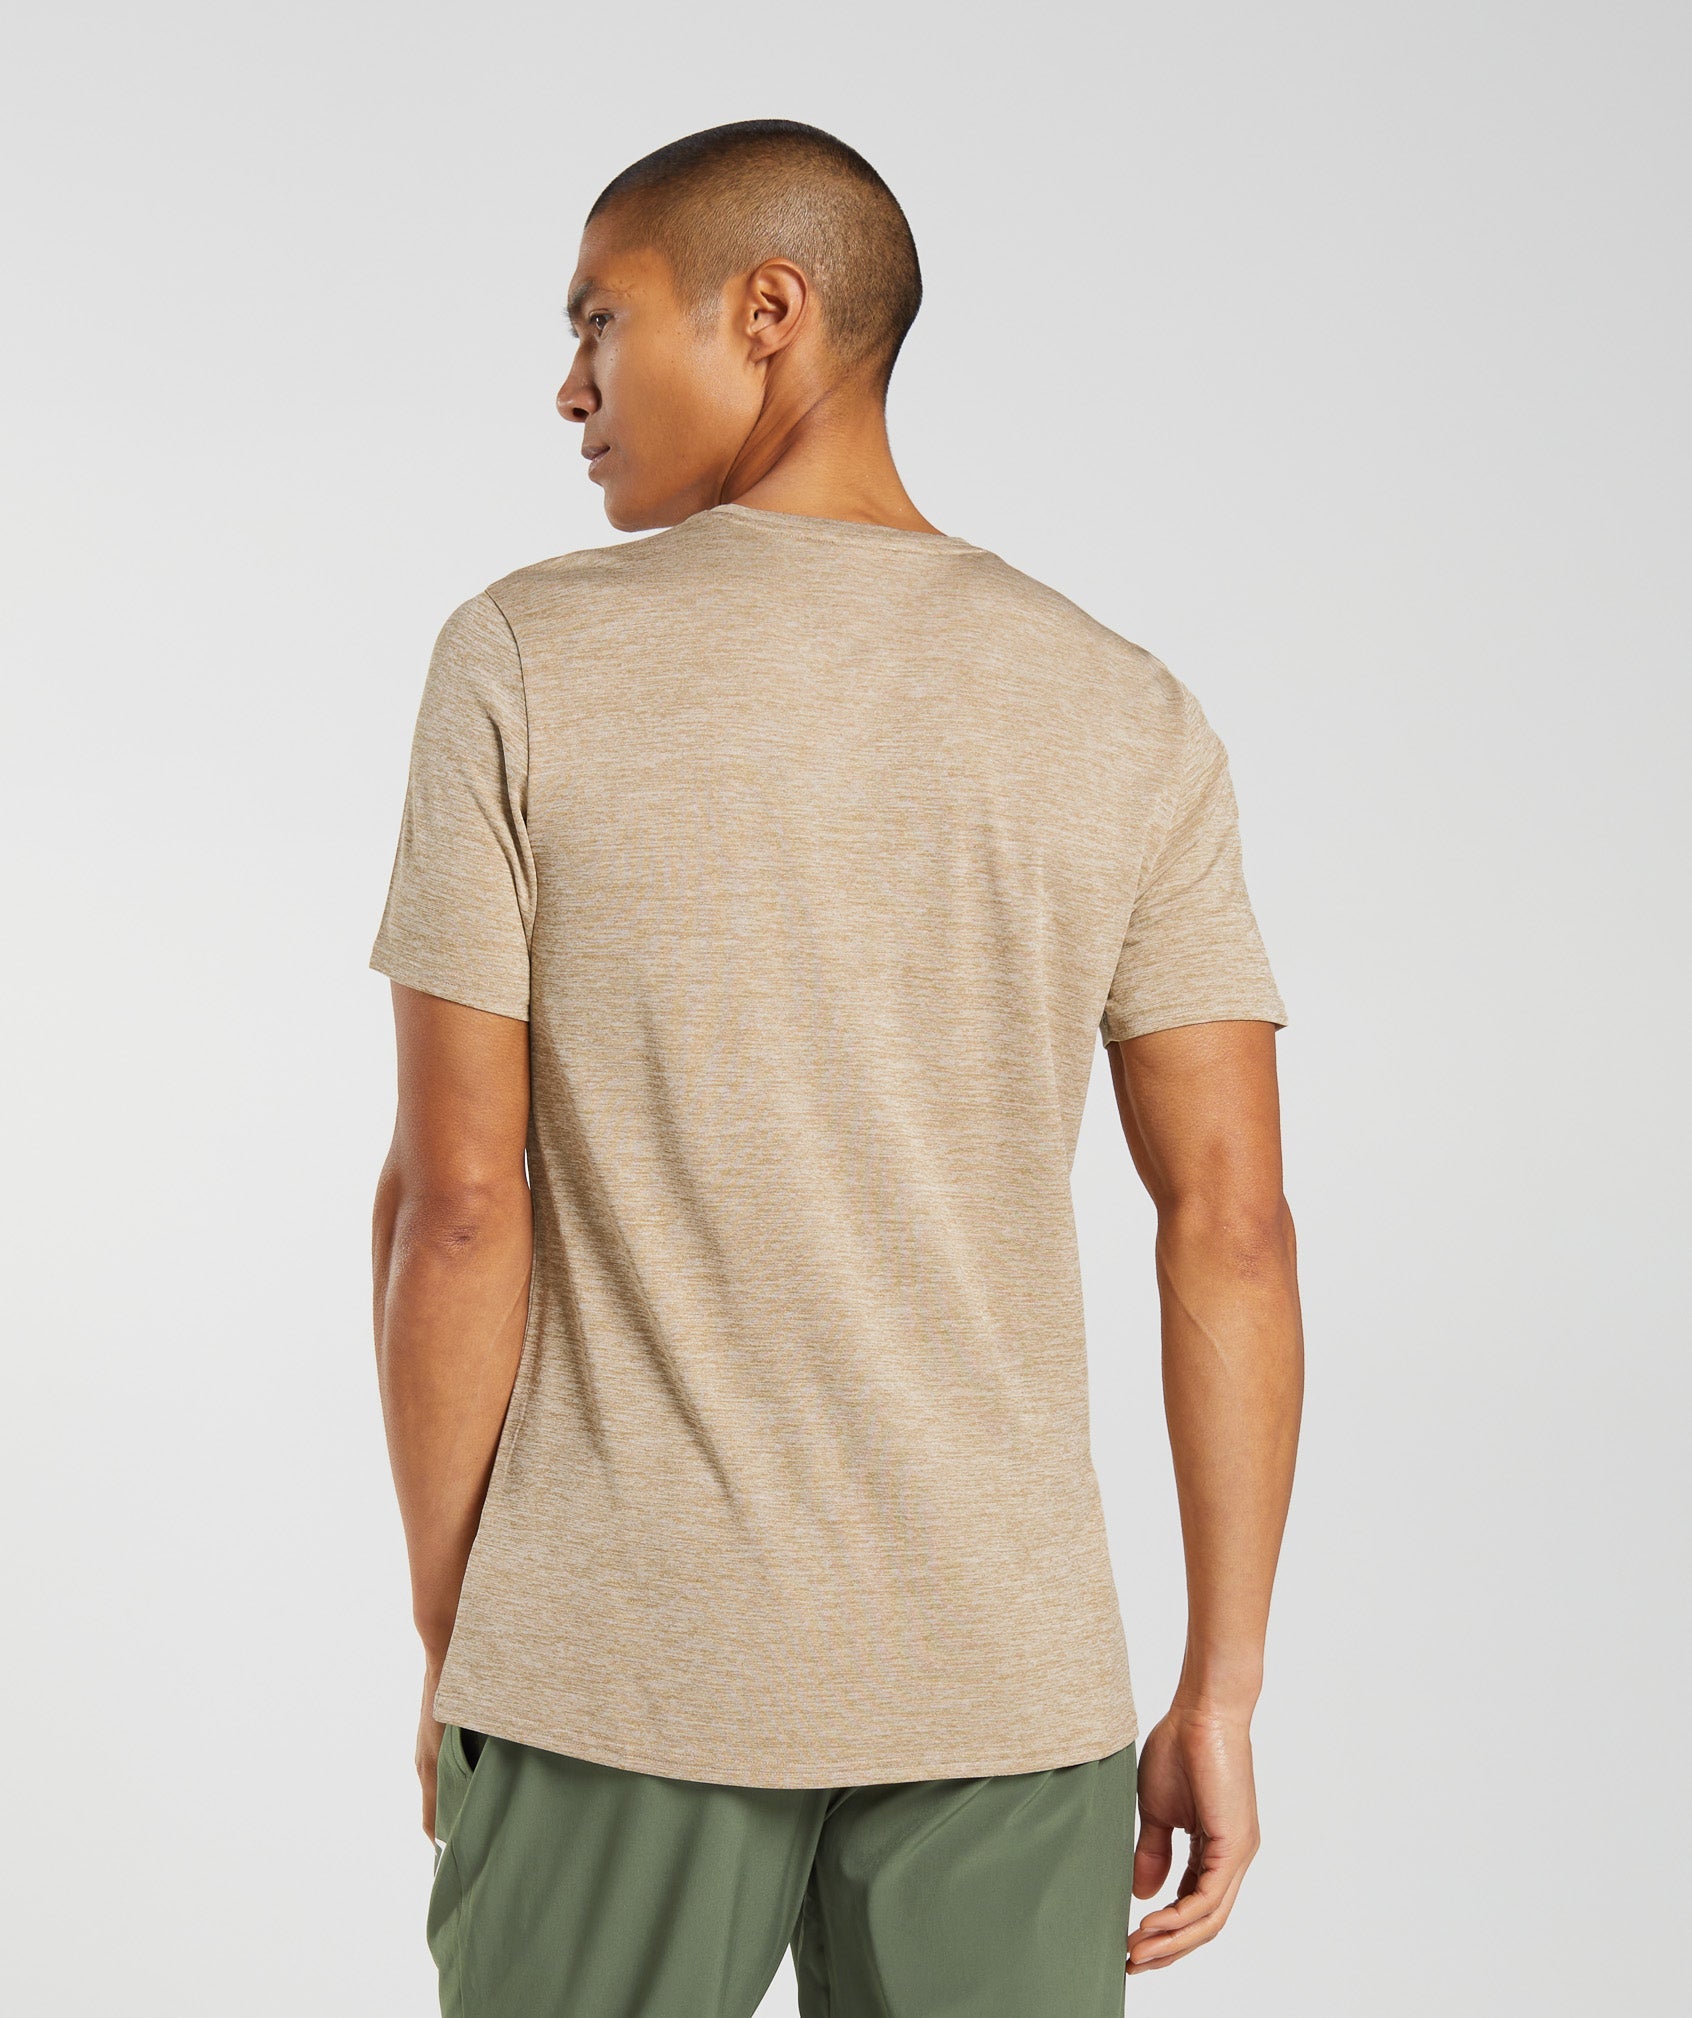 Arrival Marl T-Shirt in Toasted Brown/Camel Brown Marl - view 2